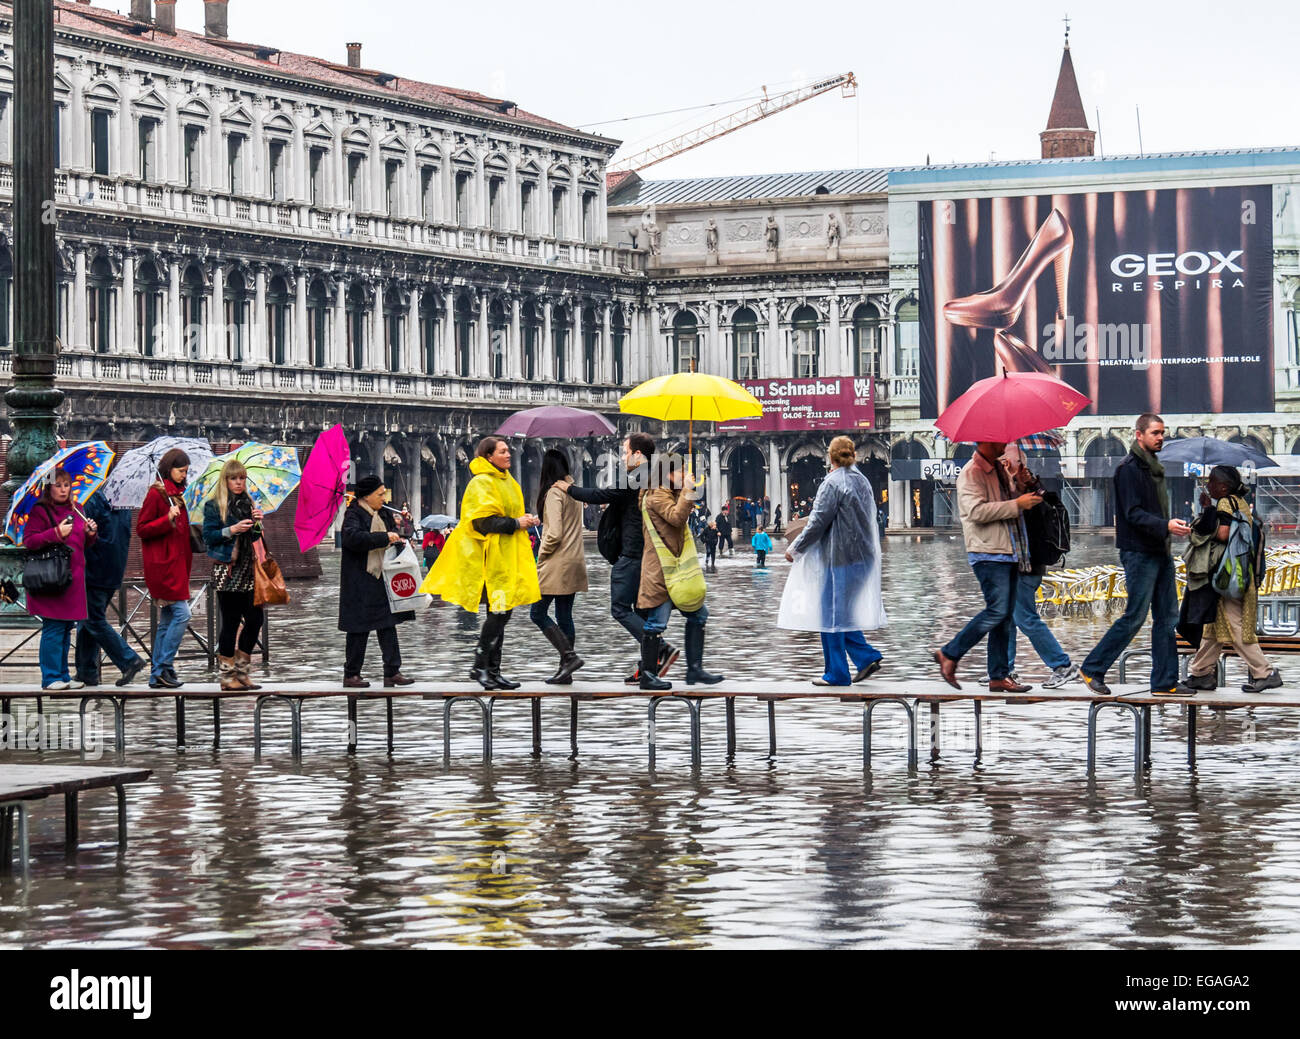 Tourists walking along raised walkways during flooding (acqua alta) in St Marks Square, Venice Italy Stock Photo